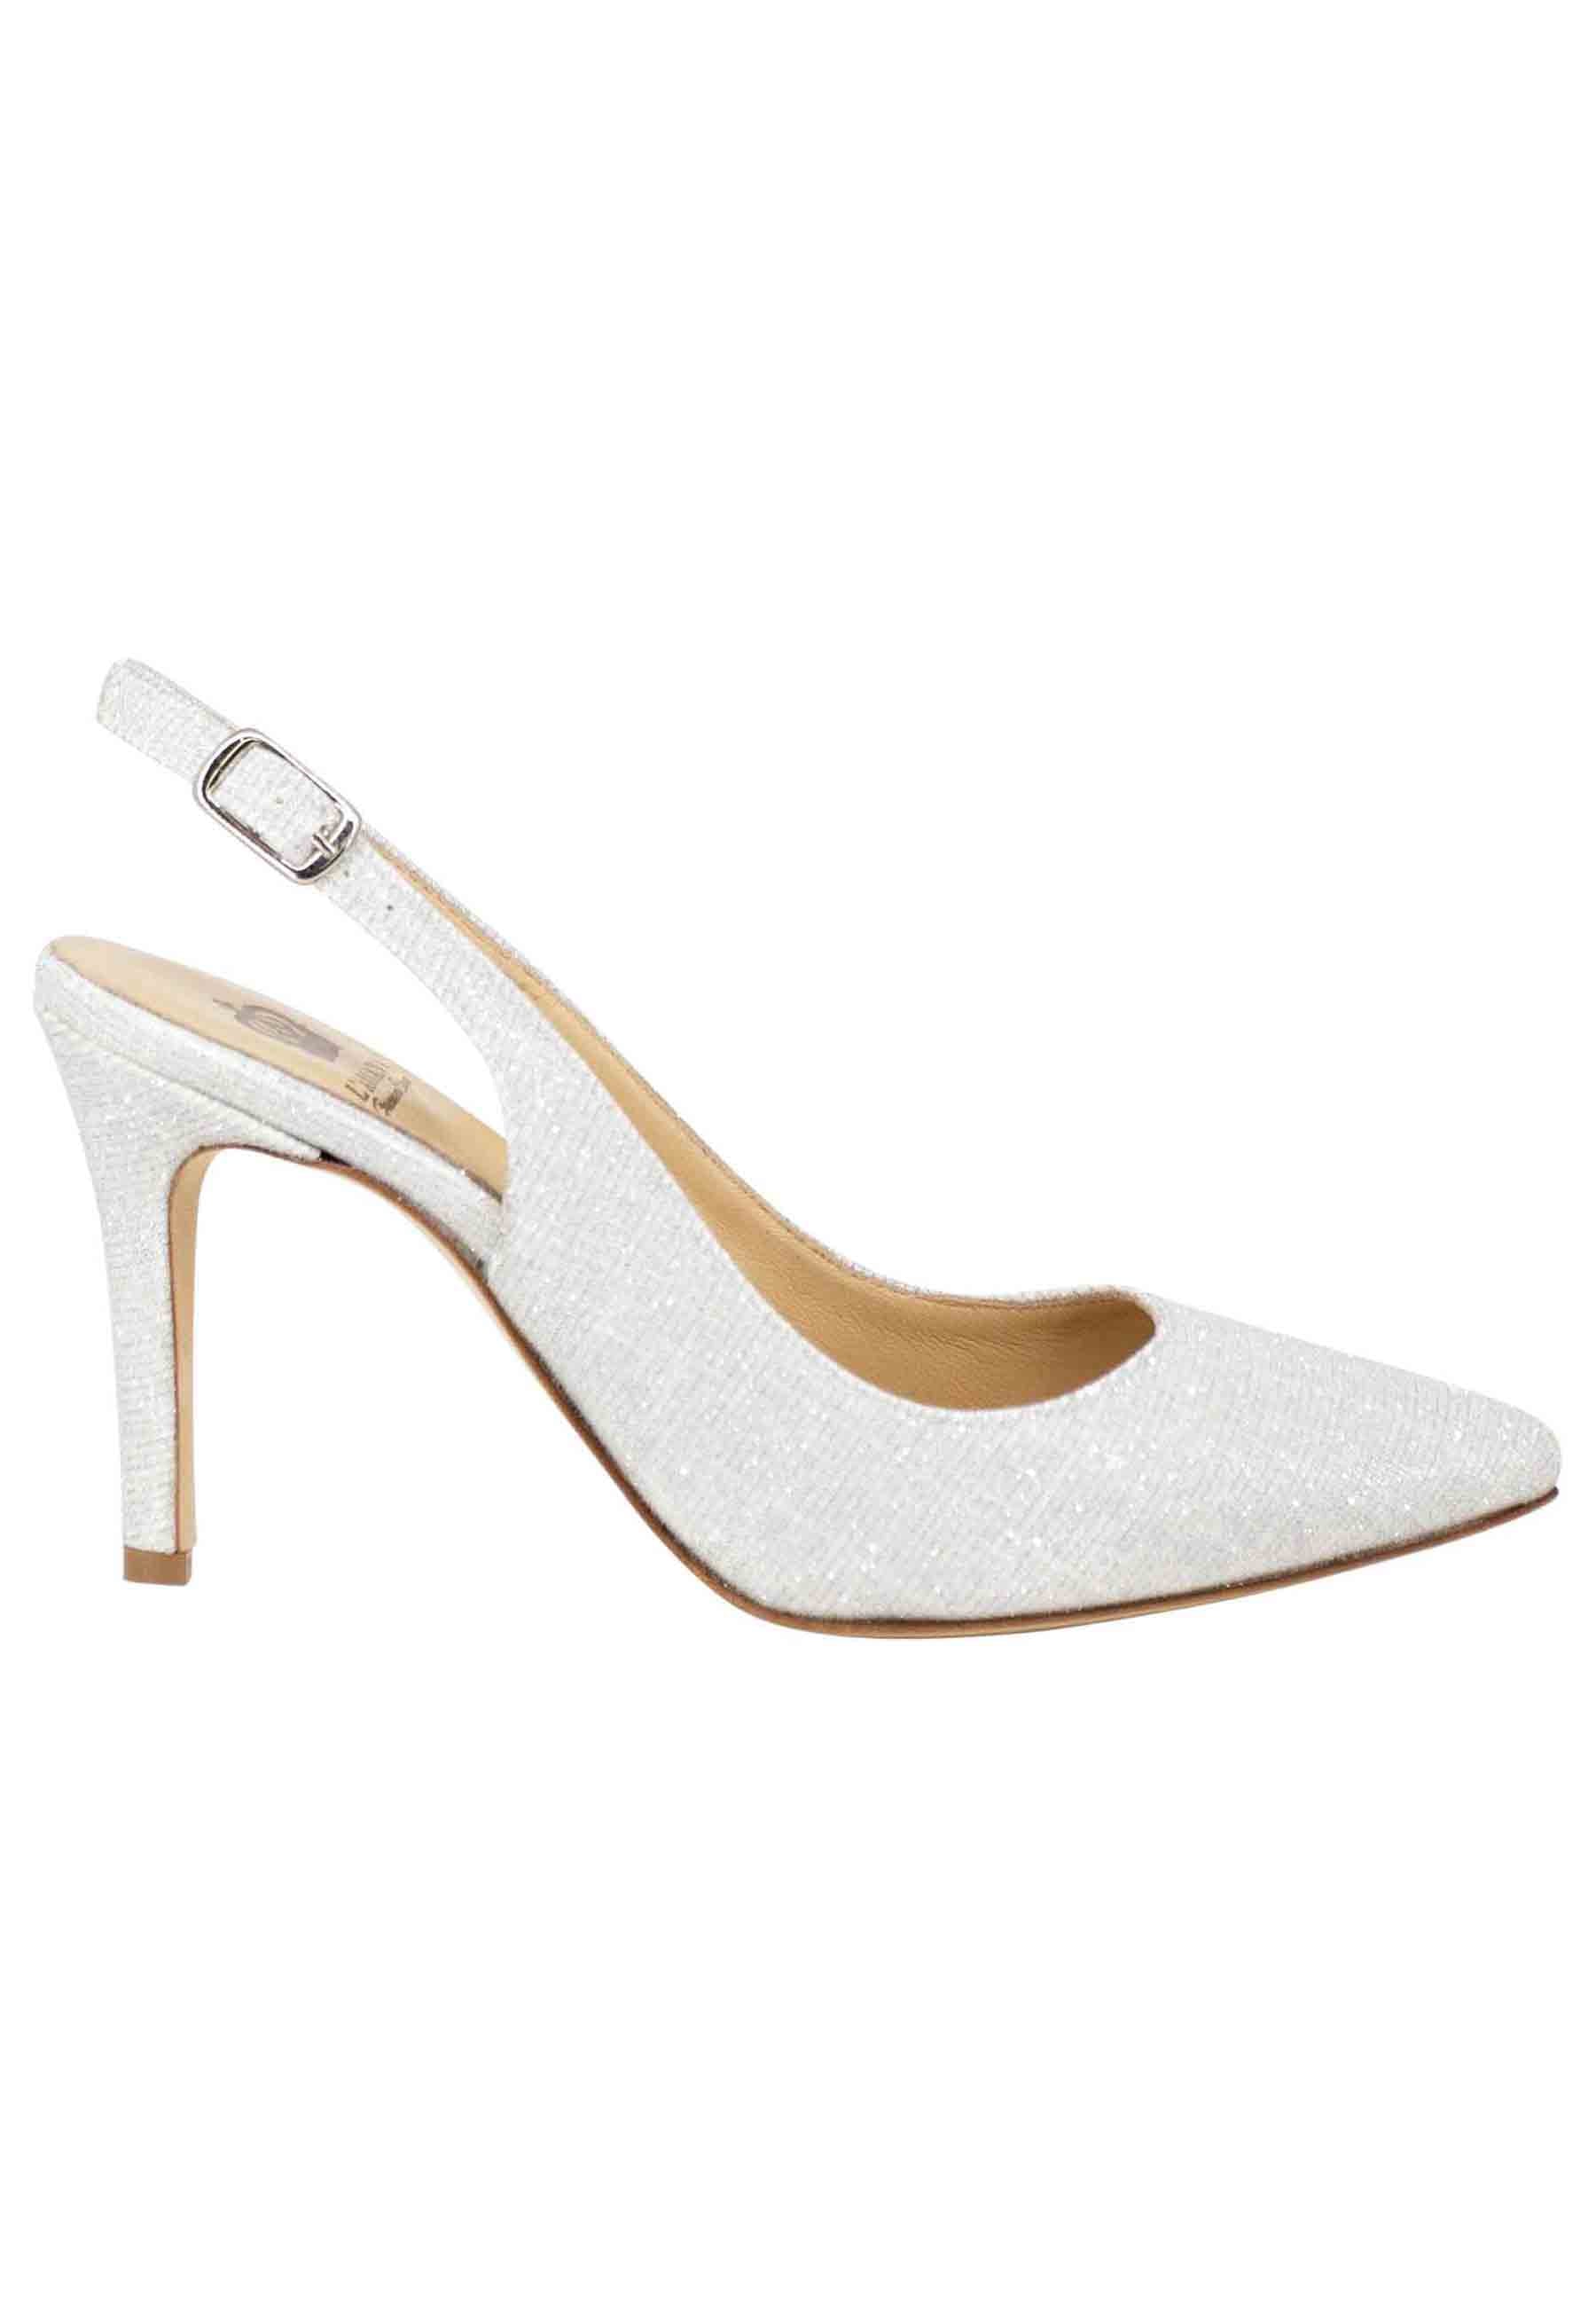 Women's slingback pumps in white glitter fabric with high heel